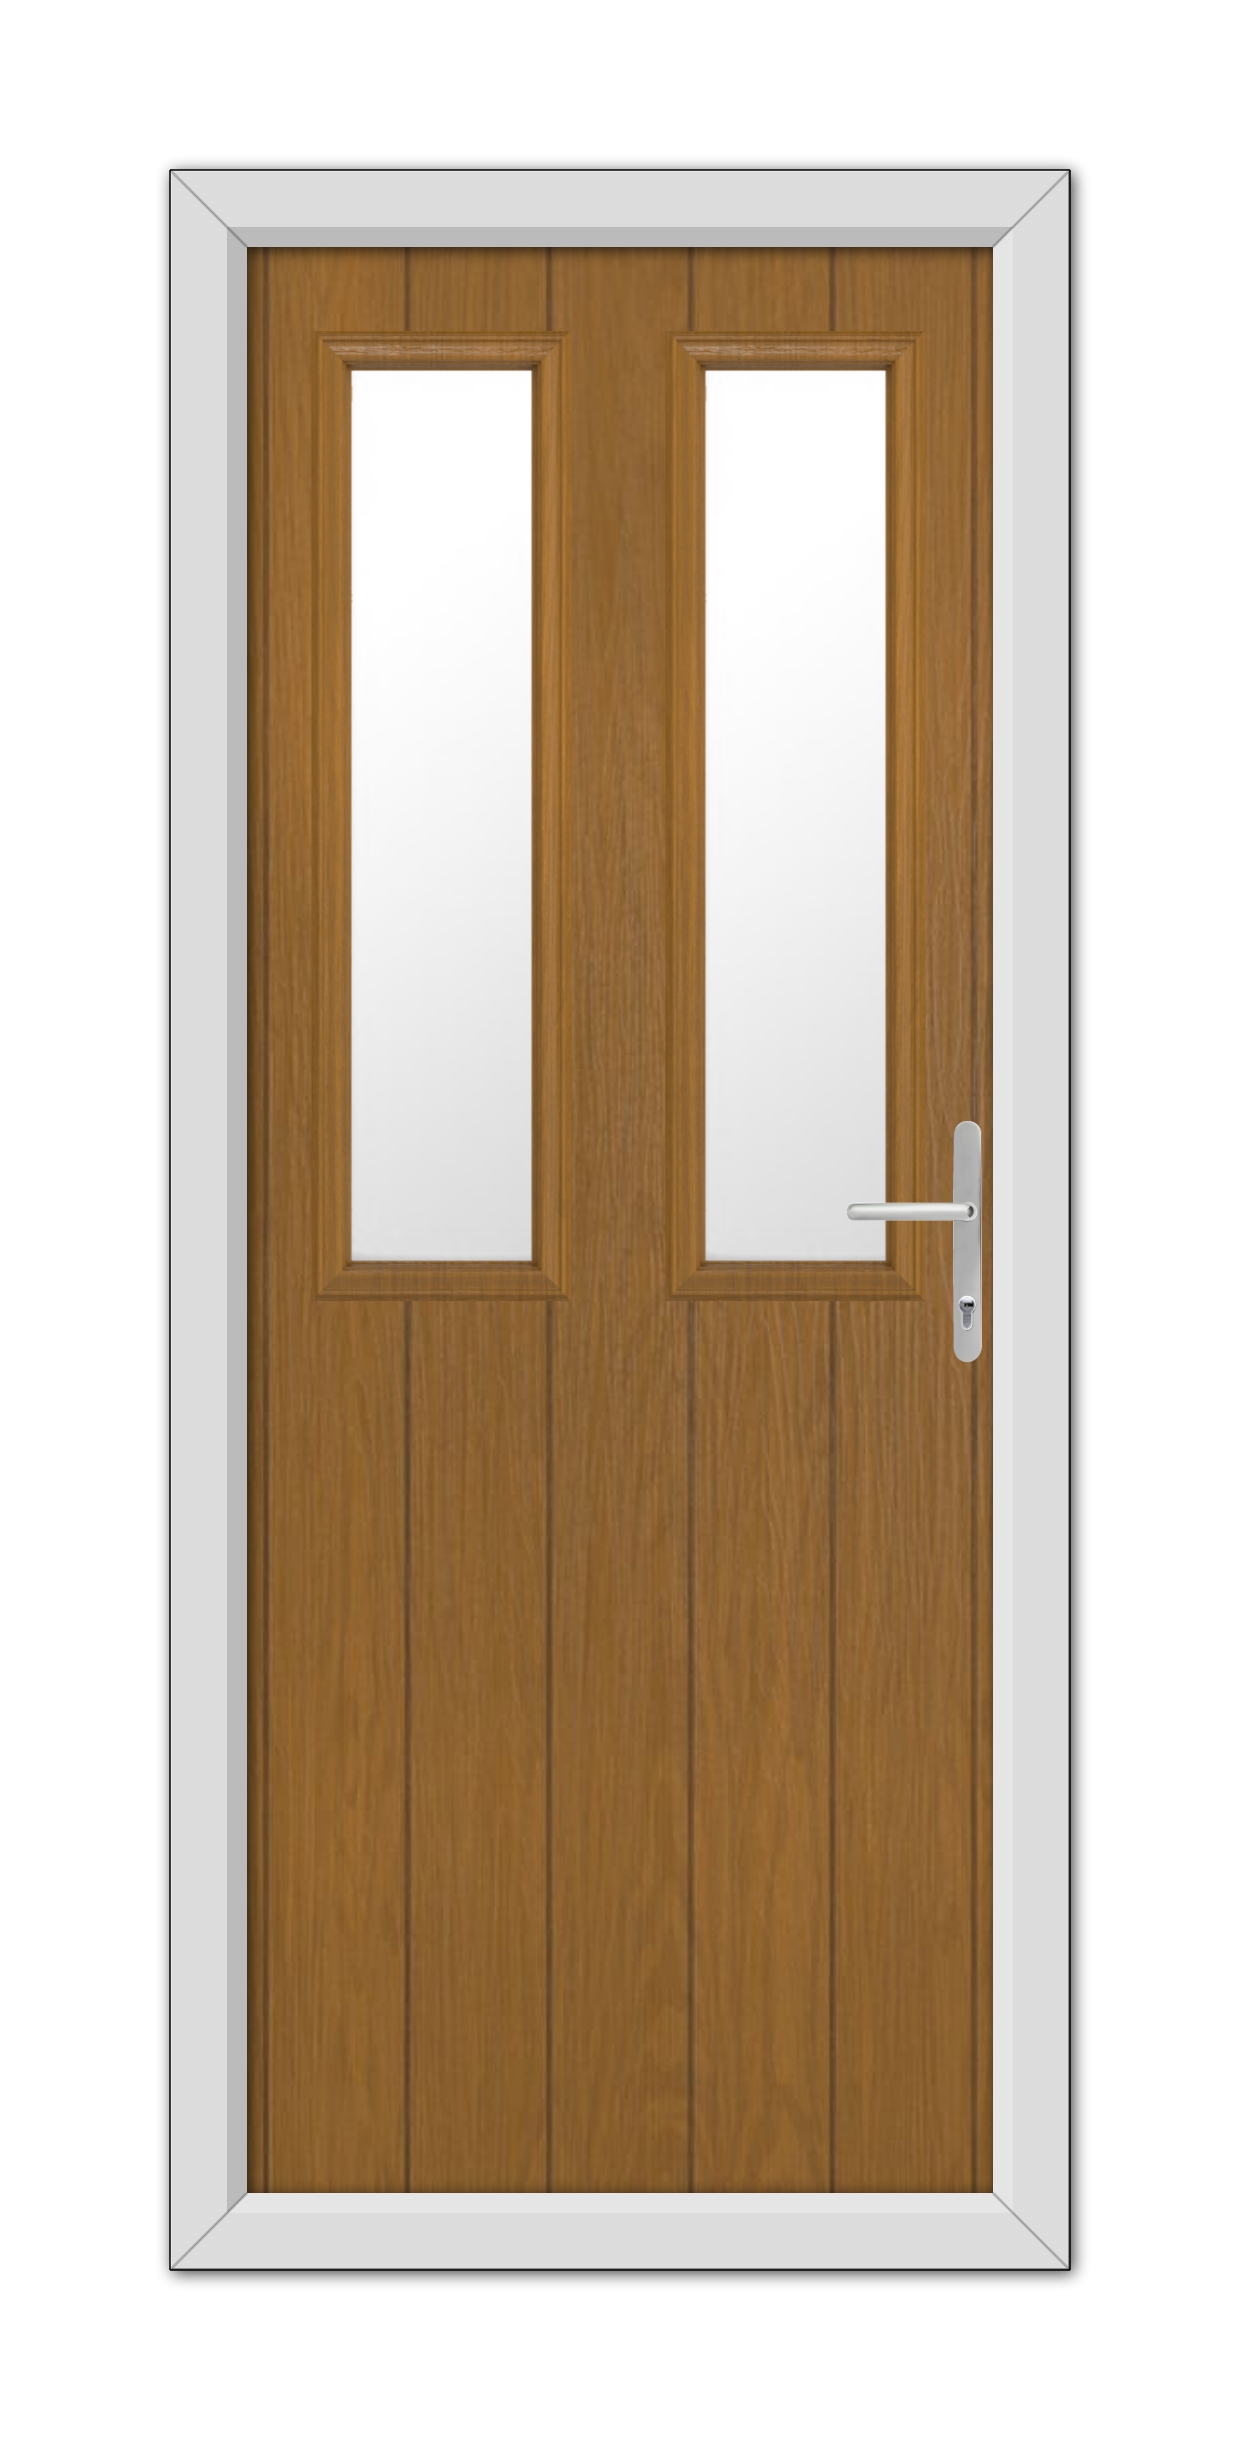 Oak Wellington Composite Door 48mm Timber Core with vertical glass panels and a modern handle, set in a white frame, isolated on a white background.